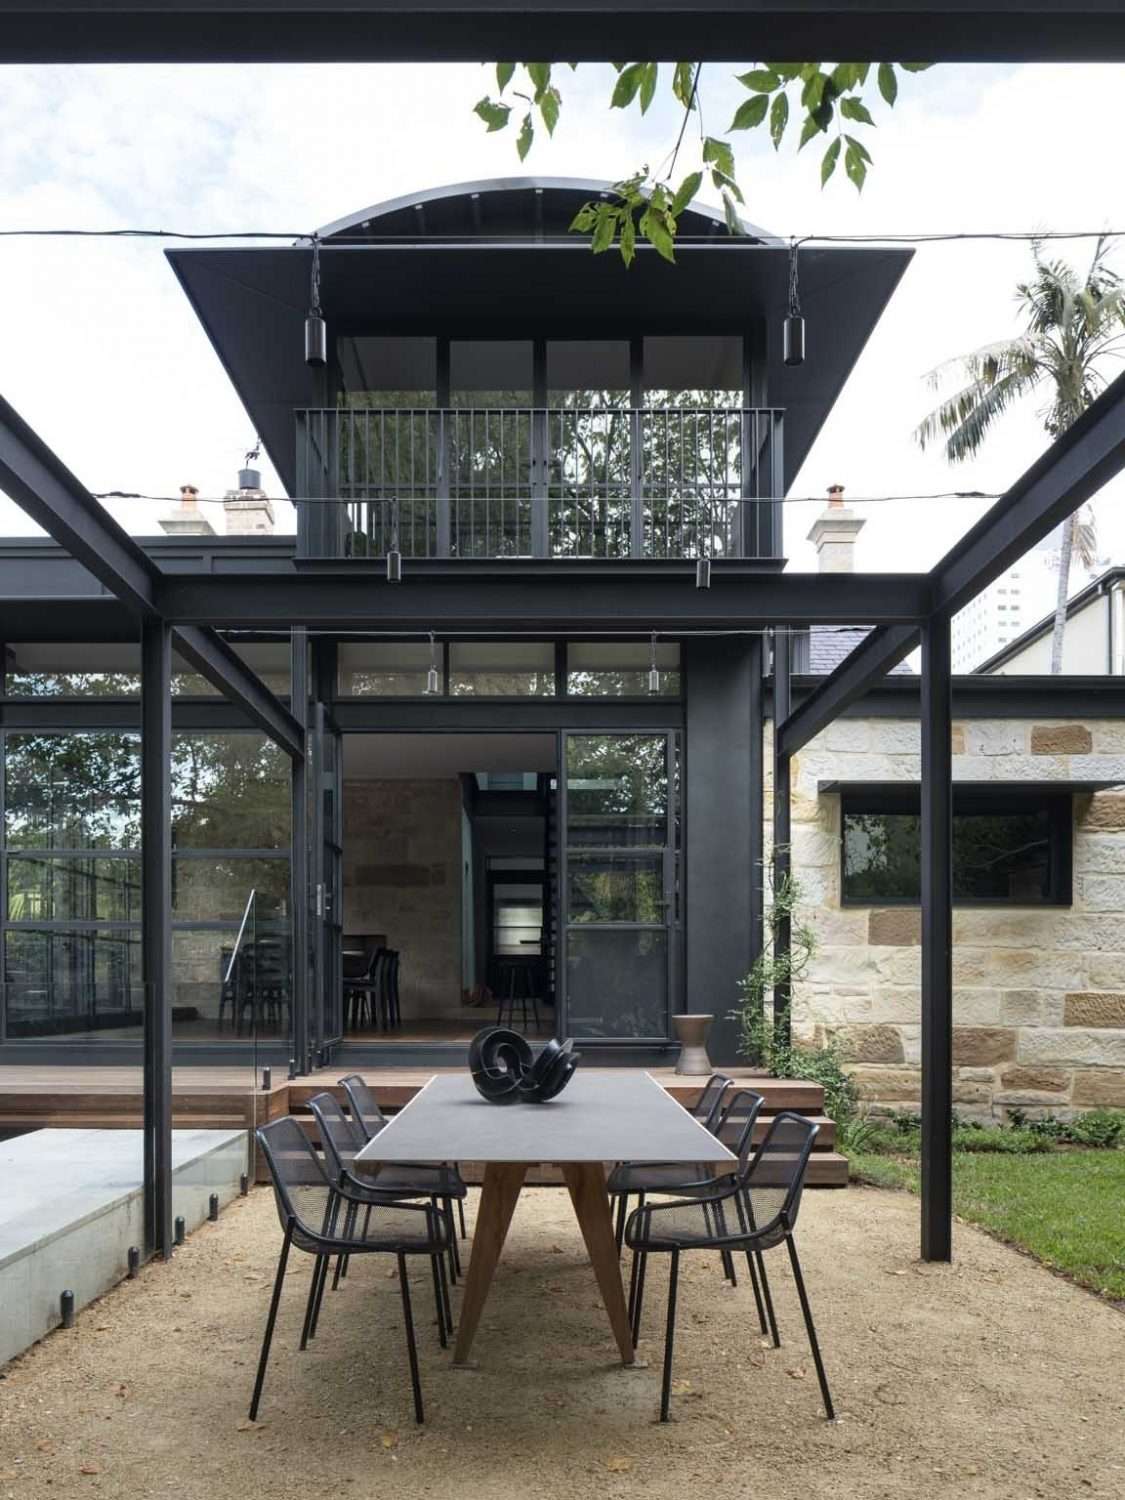 Maranatha House by BIJL Architecture showing an exterior courtyard and outdoor dining area